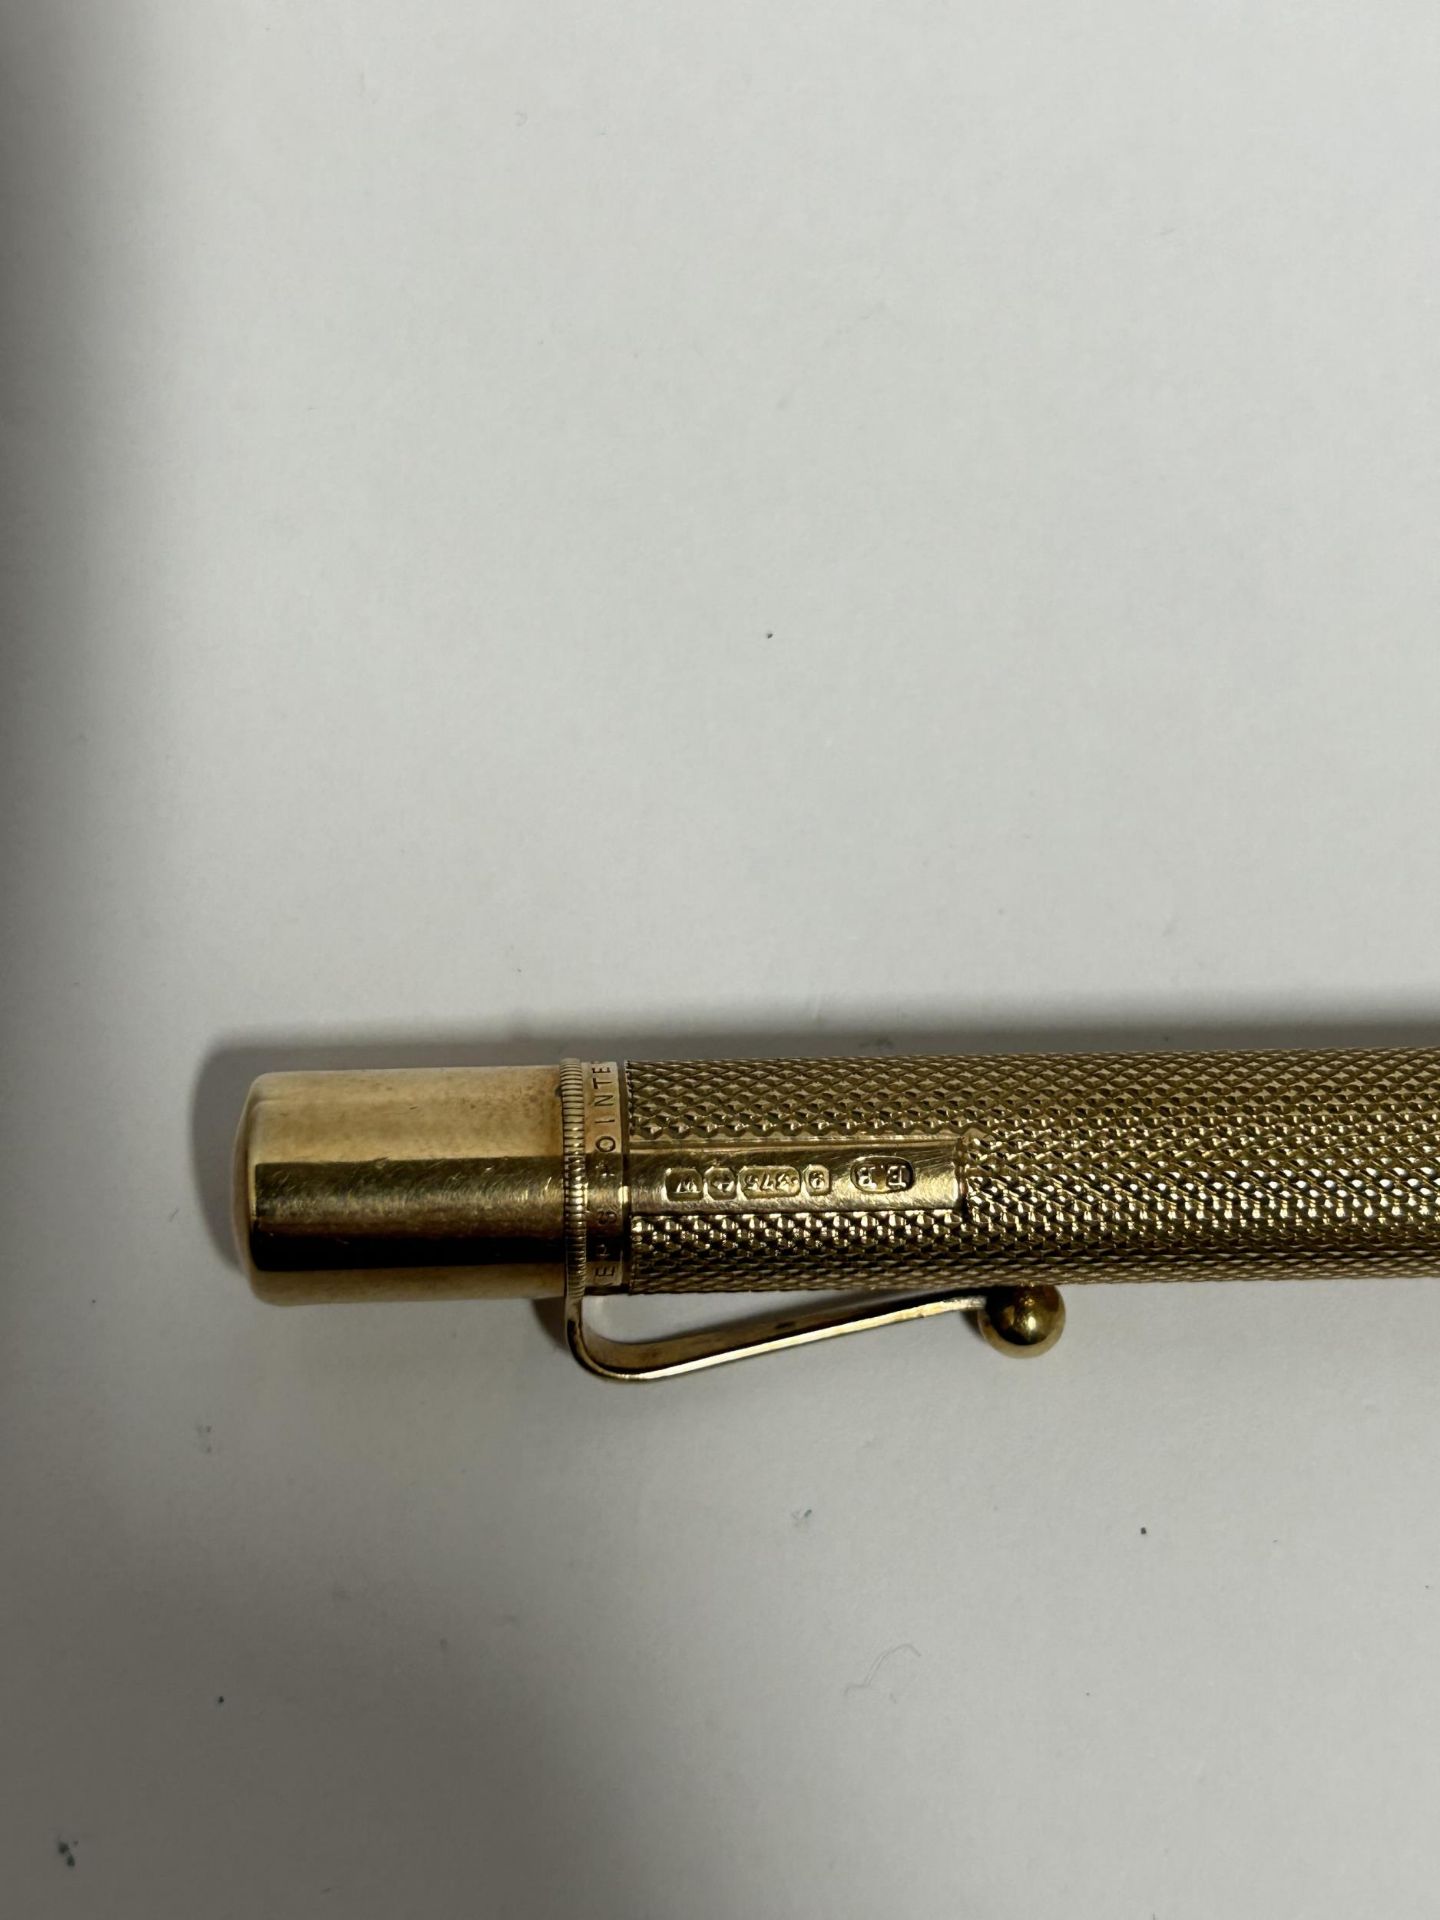 A HALLMARKED 9CT YELLOW GOLD BAKERS POINTER PROPELLING PENCIL GROSS WEIGHT 33.13 GRAMS - Image 2 of 6